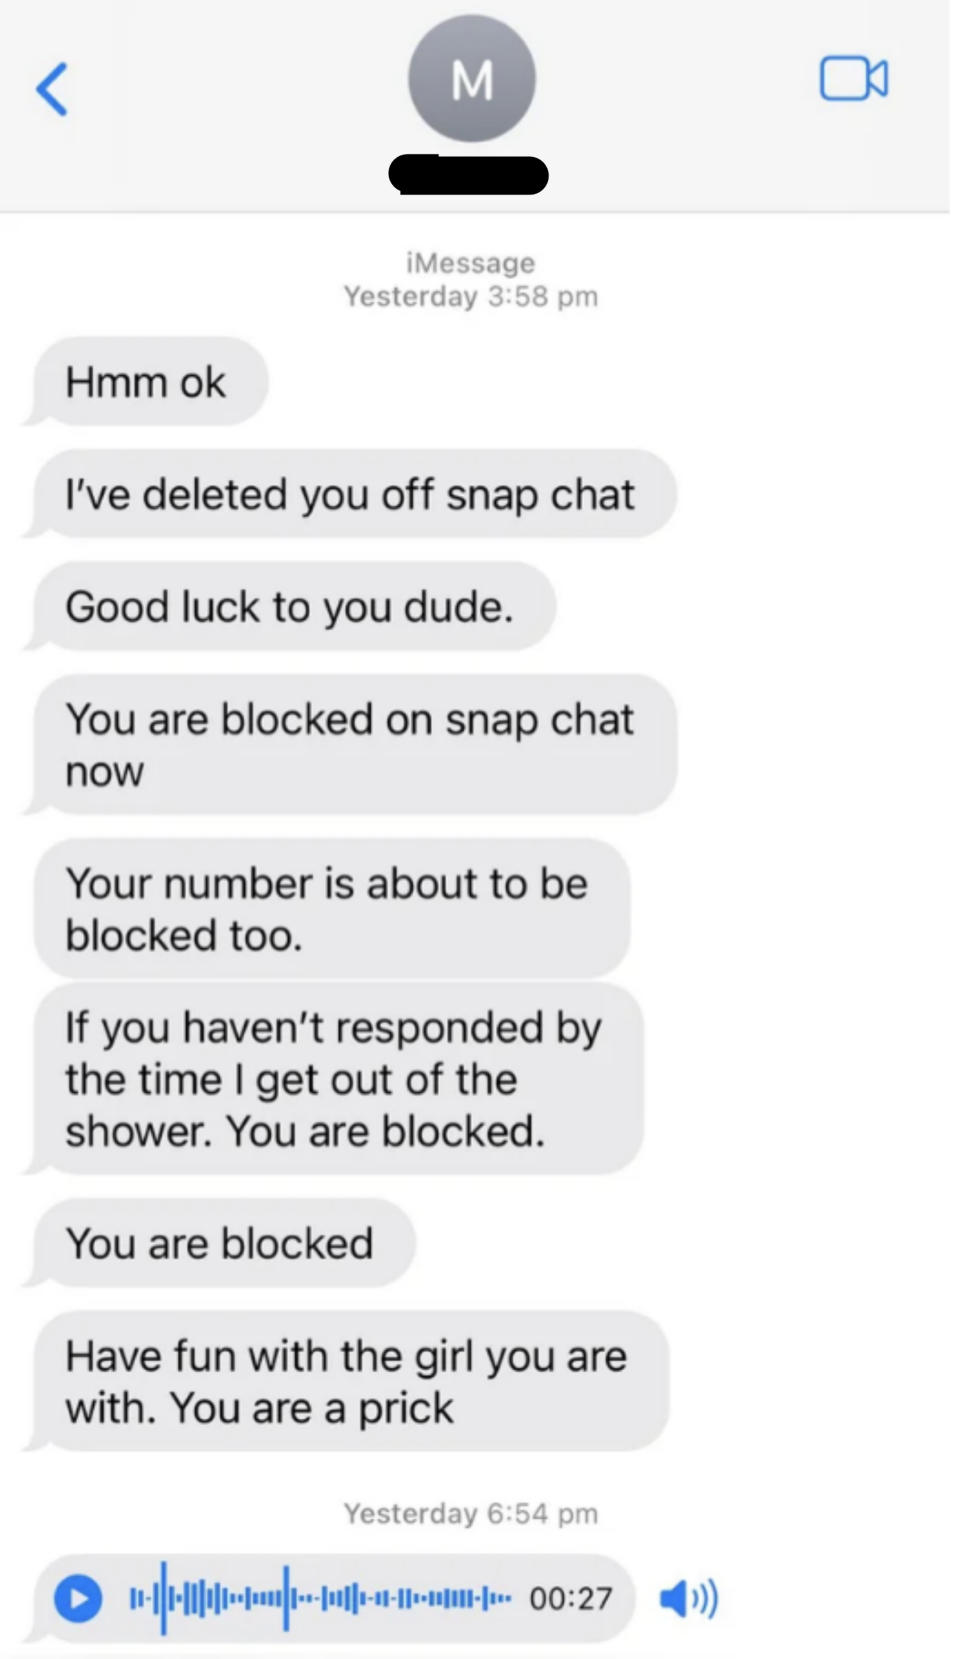 person keeps sending messages to tell the other person they will be blocked and the other person hasn't even responded to anything